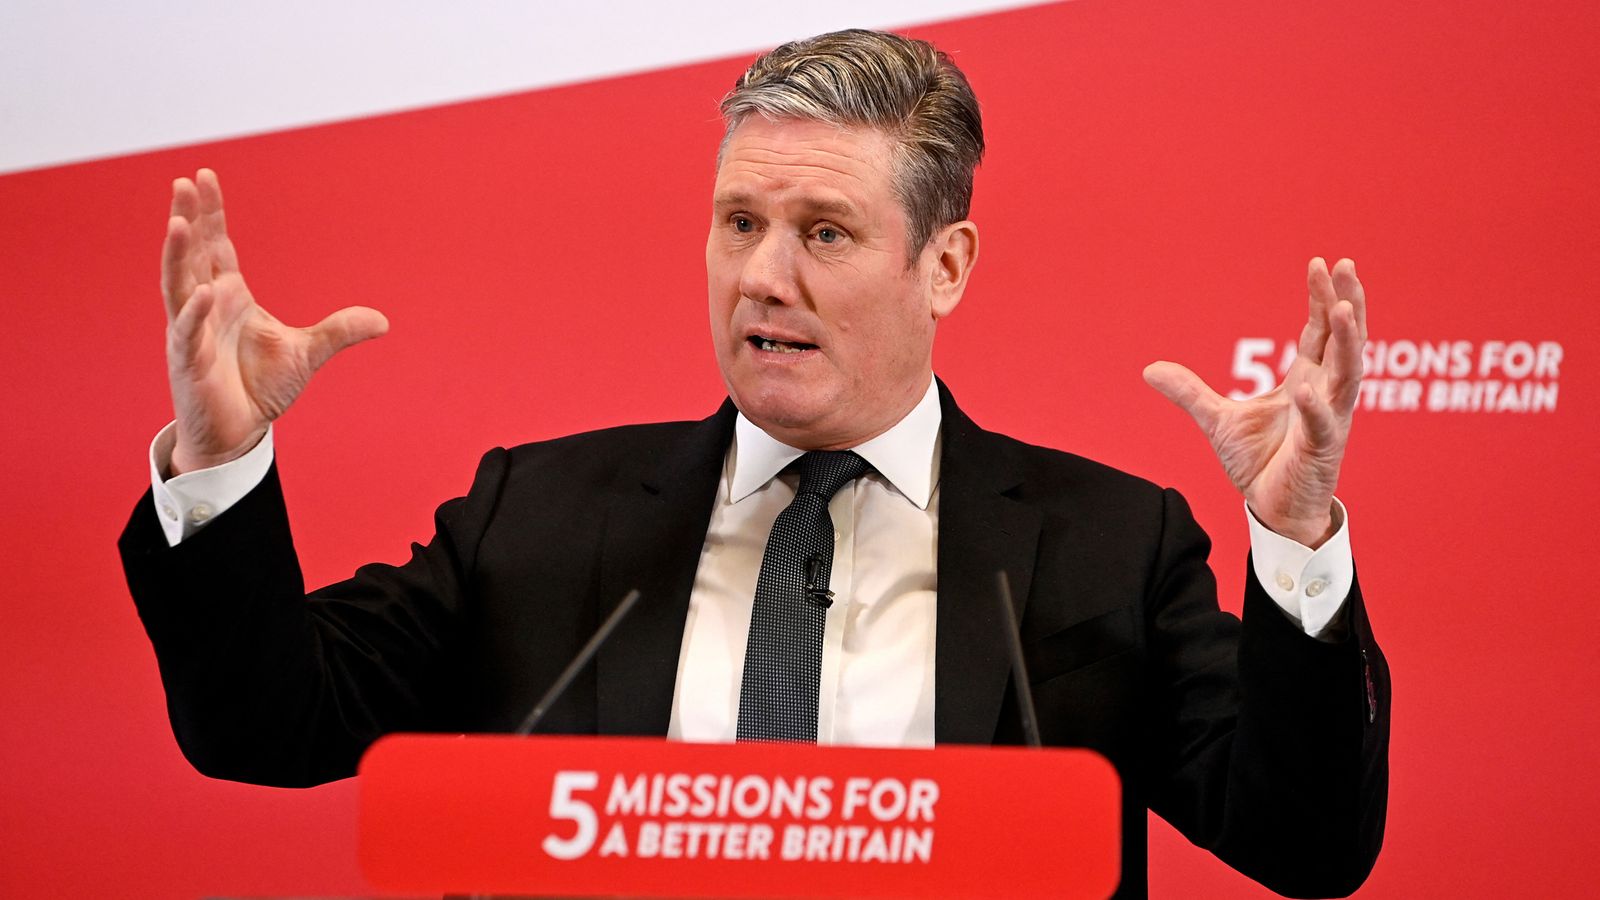 Sir Keir Starmer needs to win big at the local elections to keep up Labour's momentum